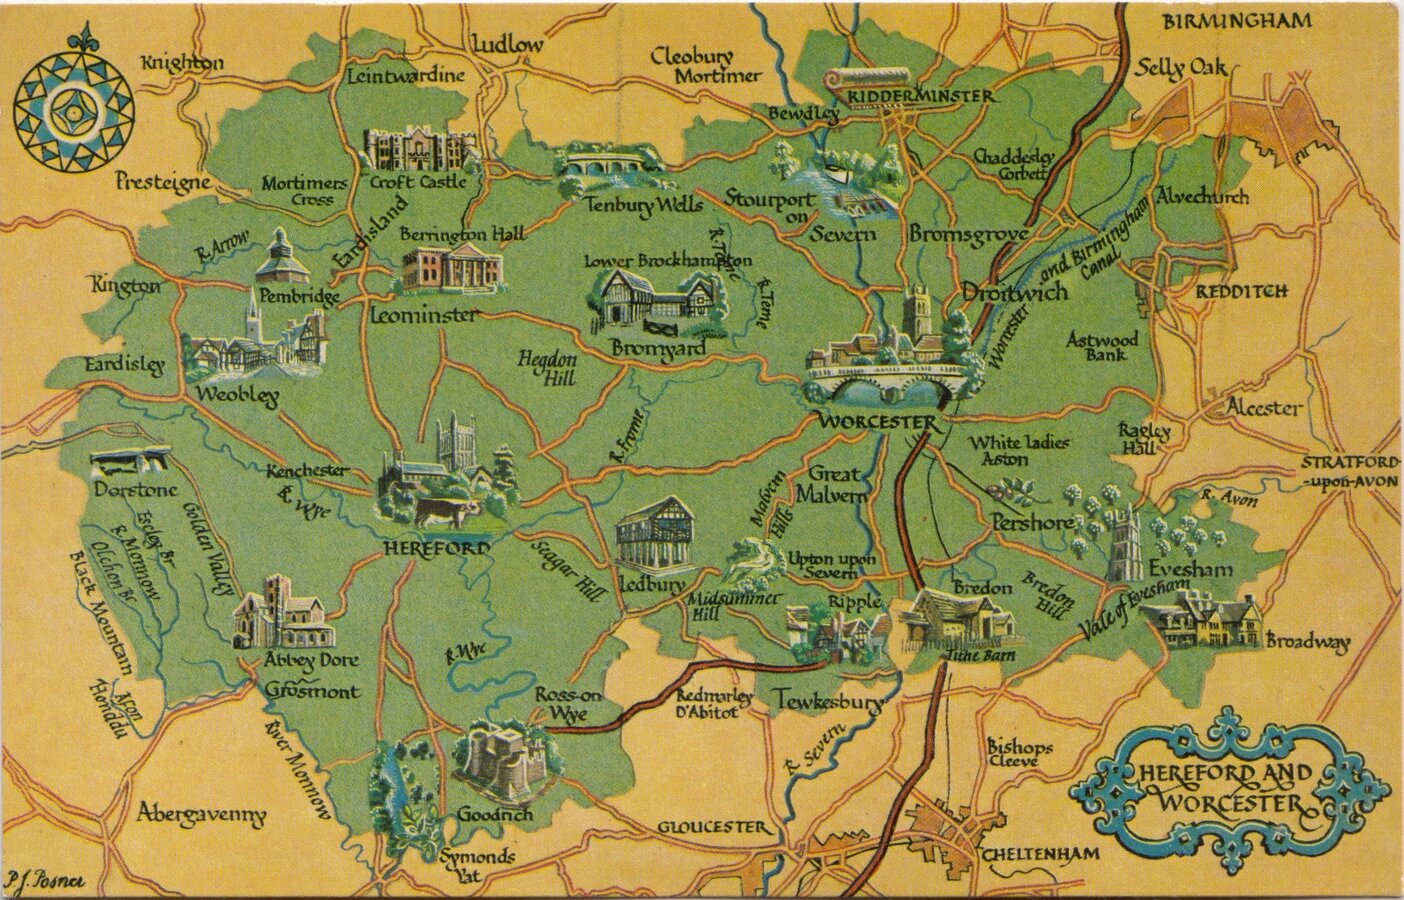 Hereford & Worcester Map Postcard